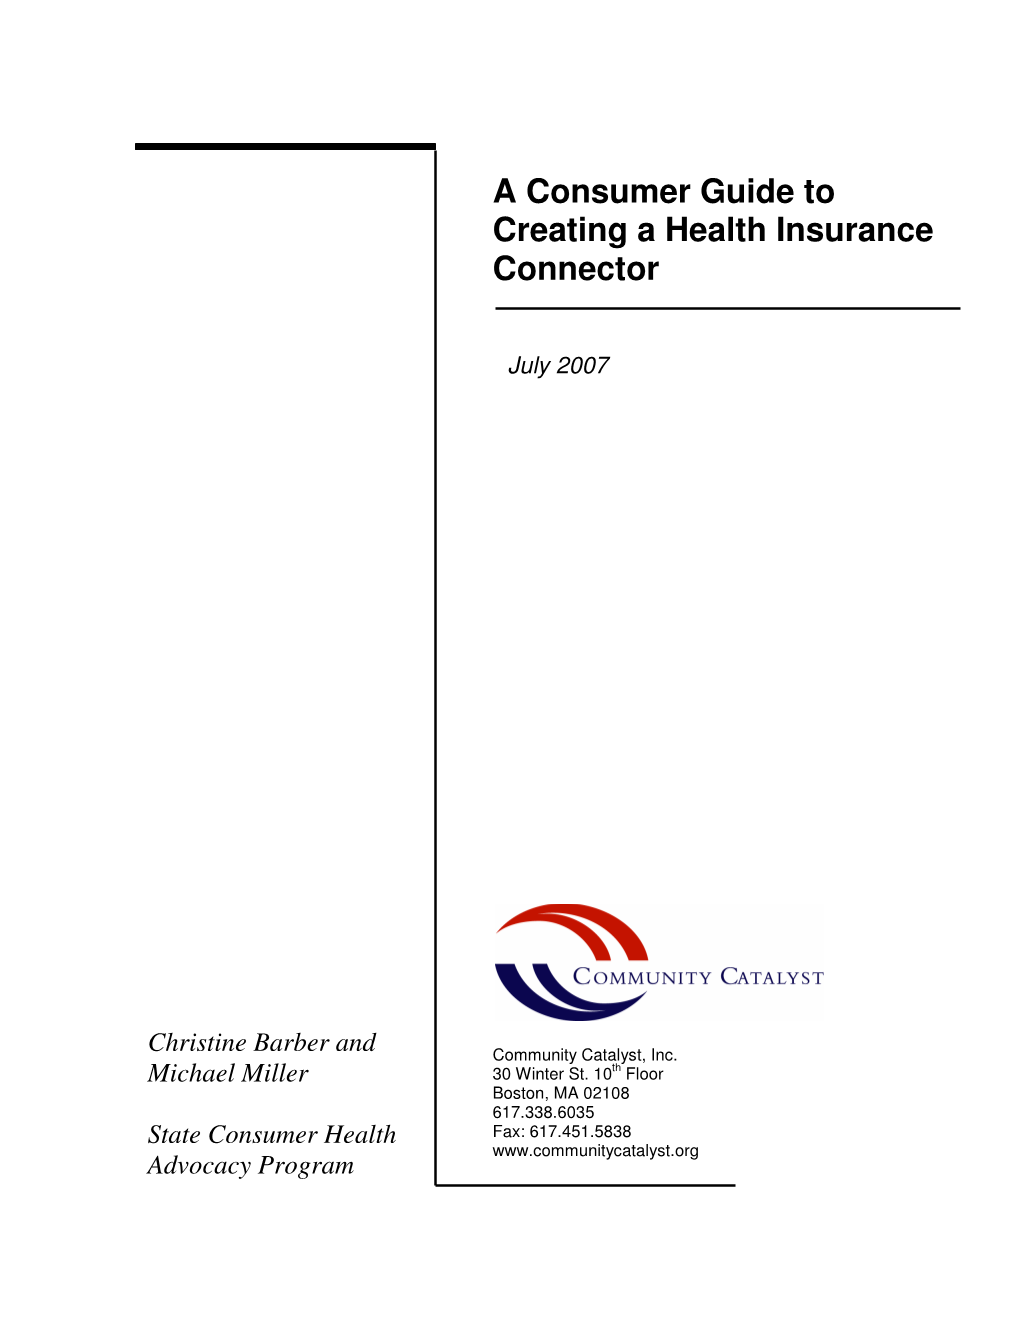 A Consumer Guide to Creating a Health Insurance Connector